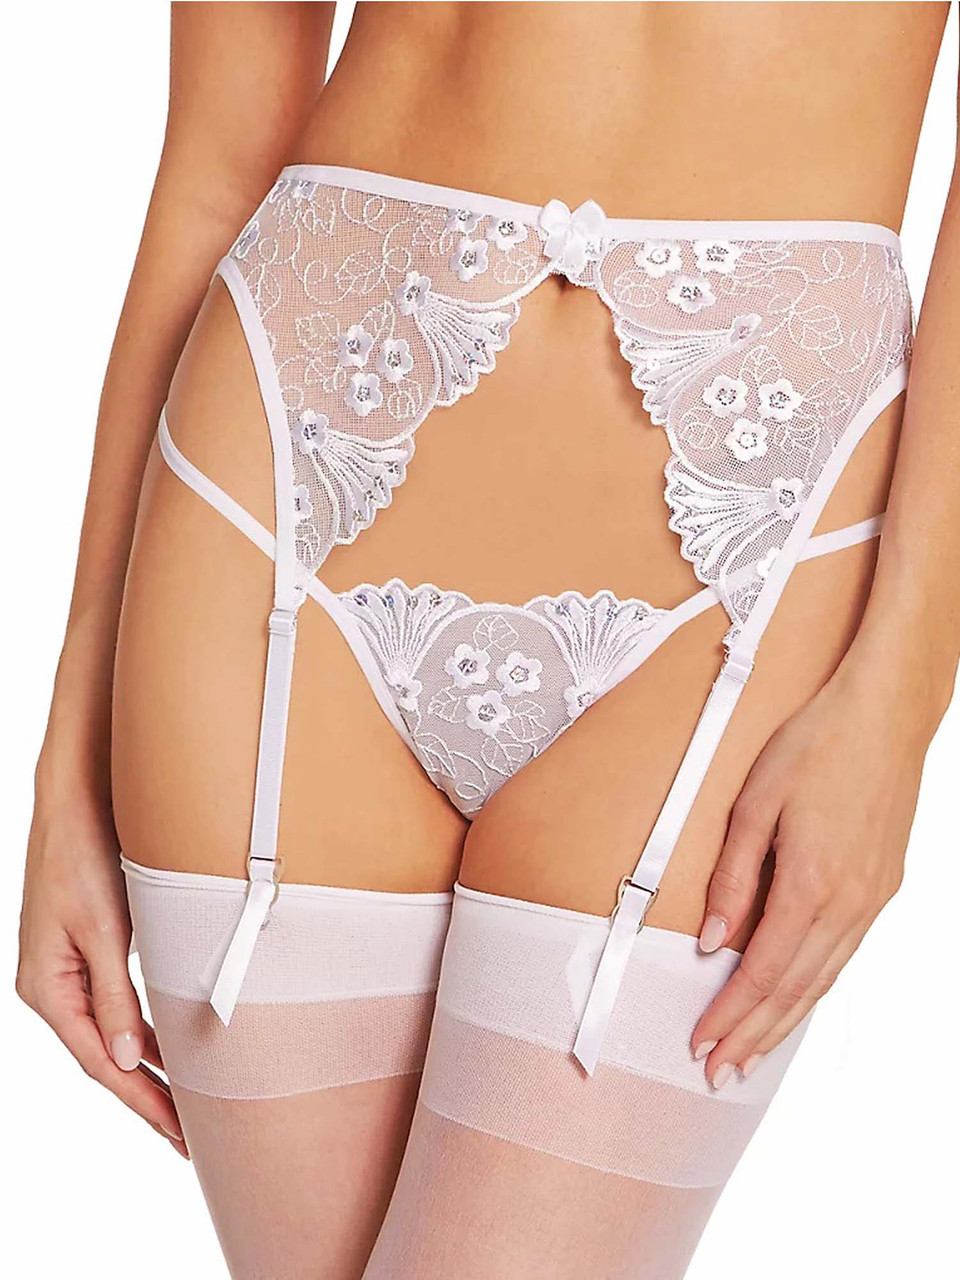 Prettylittlething Women's Lingerie White Swirl Embroidery Thong - Size 12